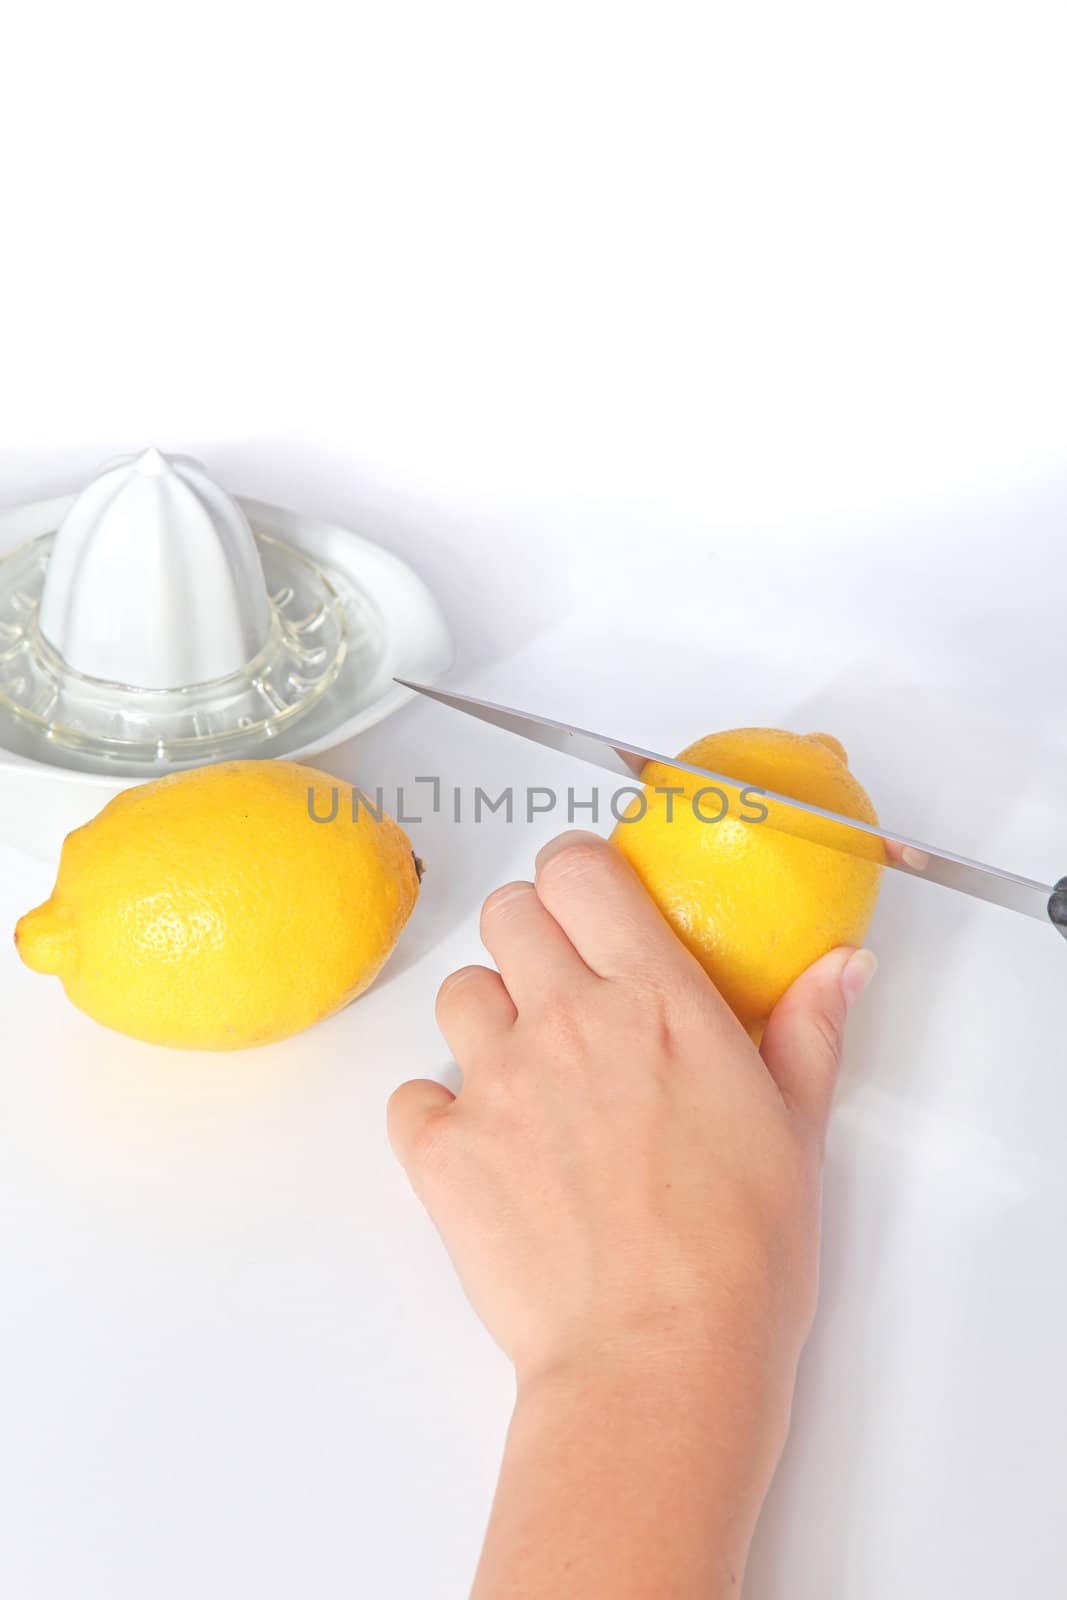 A person cutting lemons. All isolated on white background.